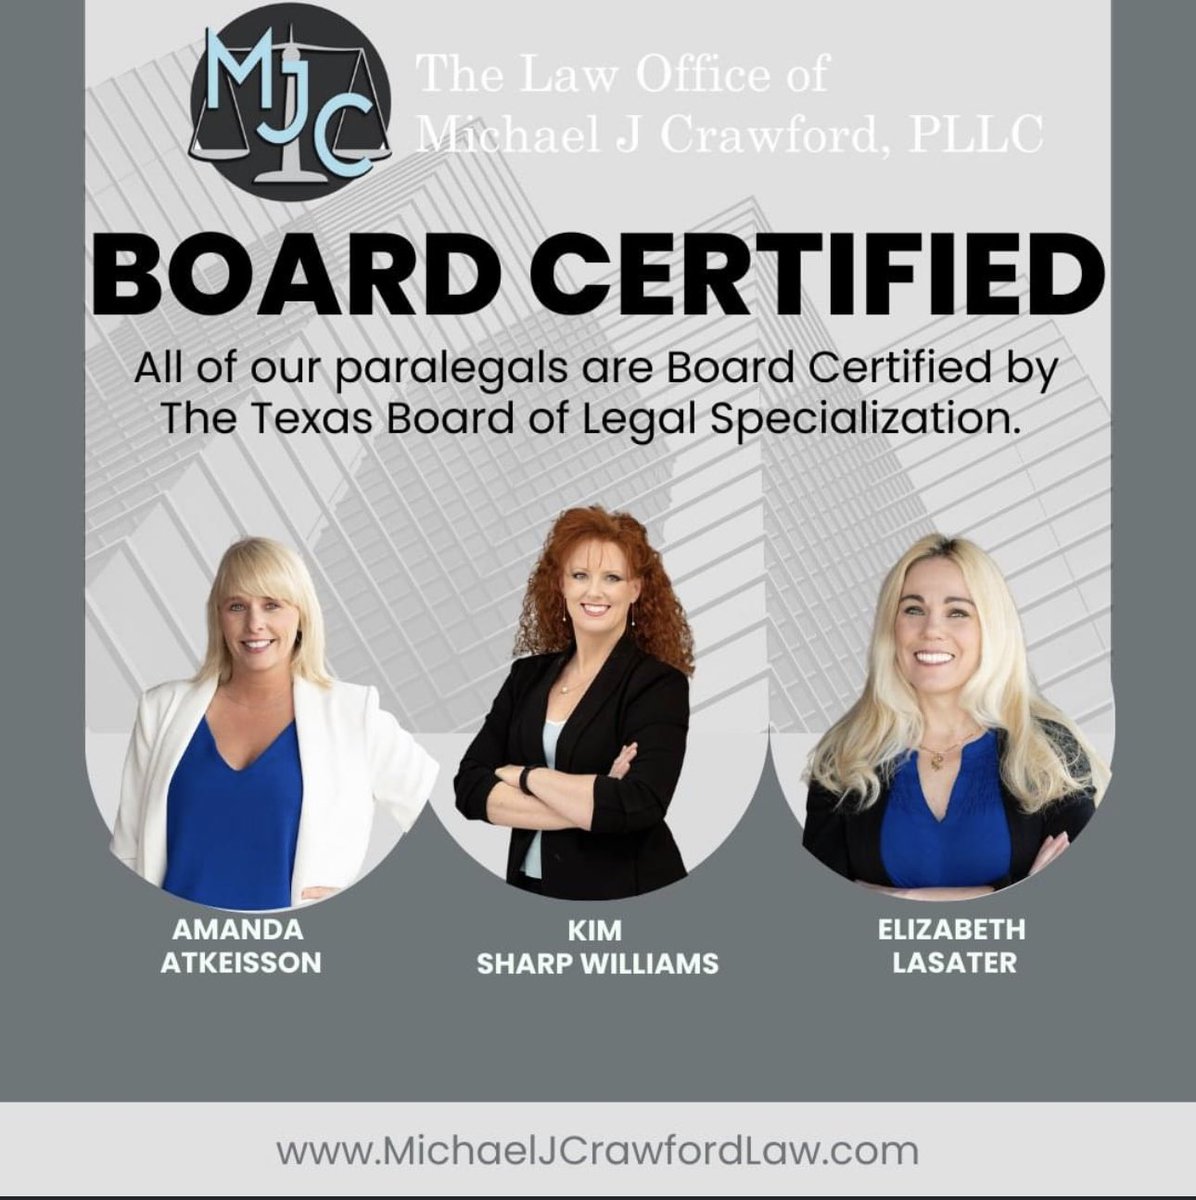 ⚡️We are PROUD to offer our clients all BOARD CERTIFIED paralegal assistance.⚡️

 #lawfirm #lawfirms #LawFirmLife #lawfirmlife #lawfirmoffice #lawfirmmarketing #paralegals #paralegalservices #paralegalsrock #paralegalstyle #paralegalsbelike #paralegalsofinstagram #paralegal